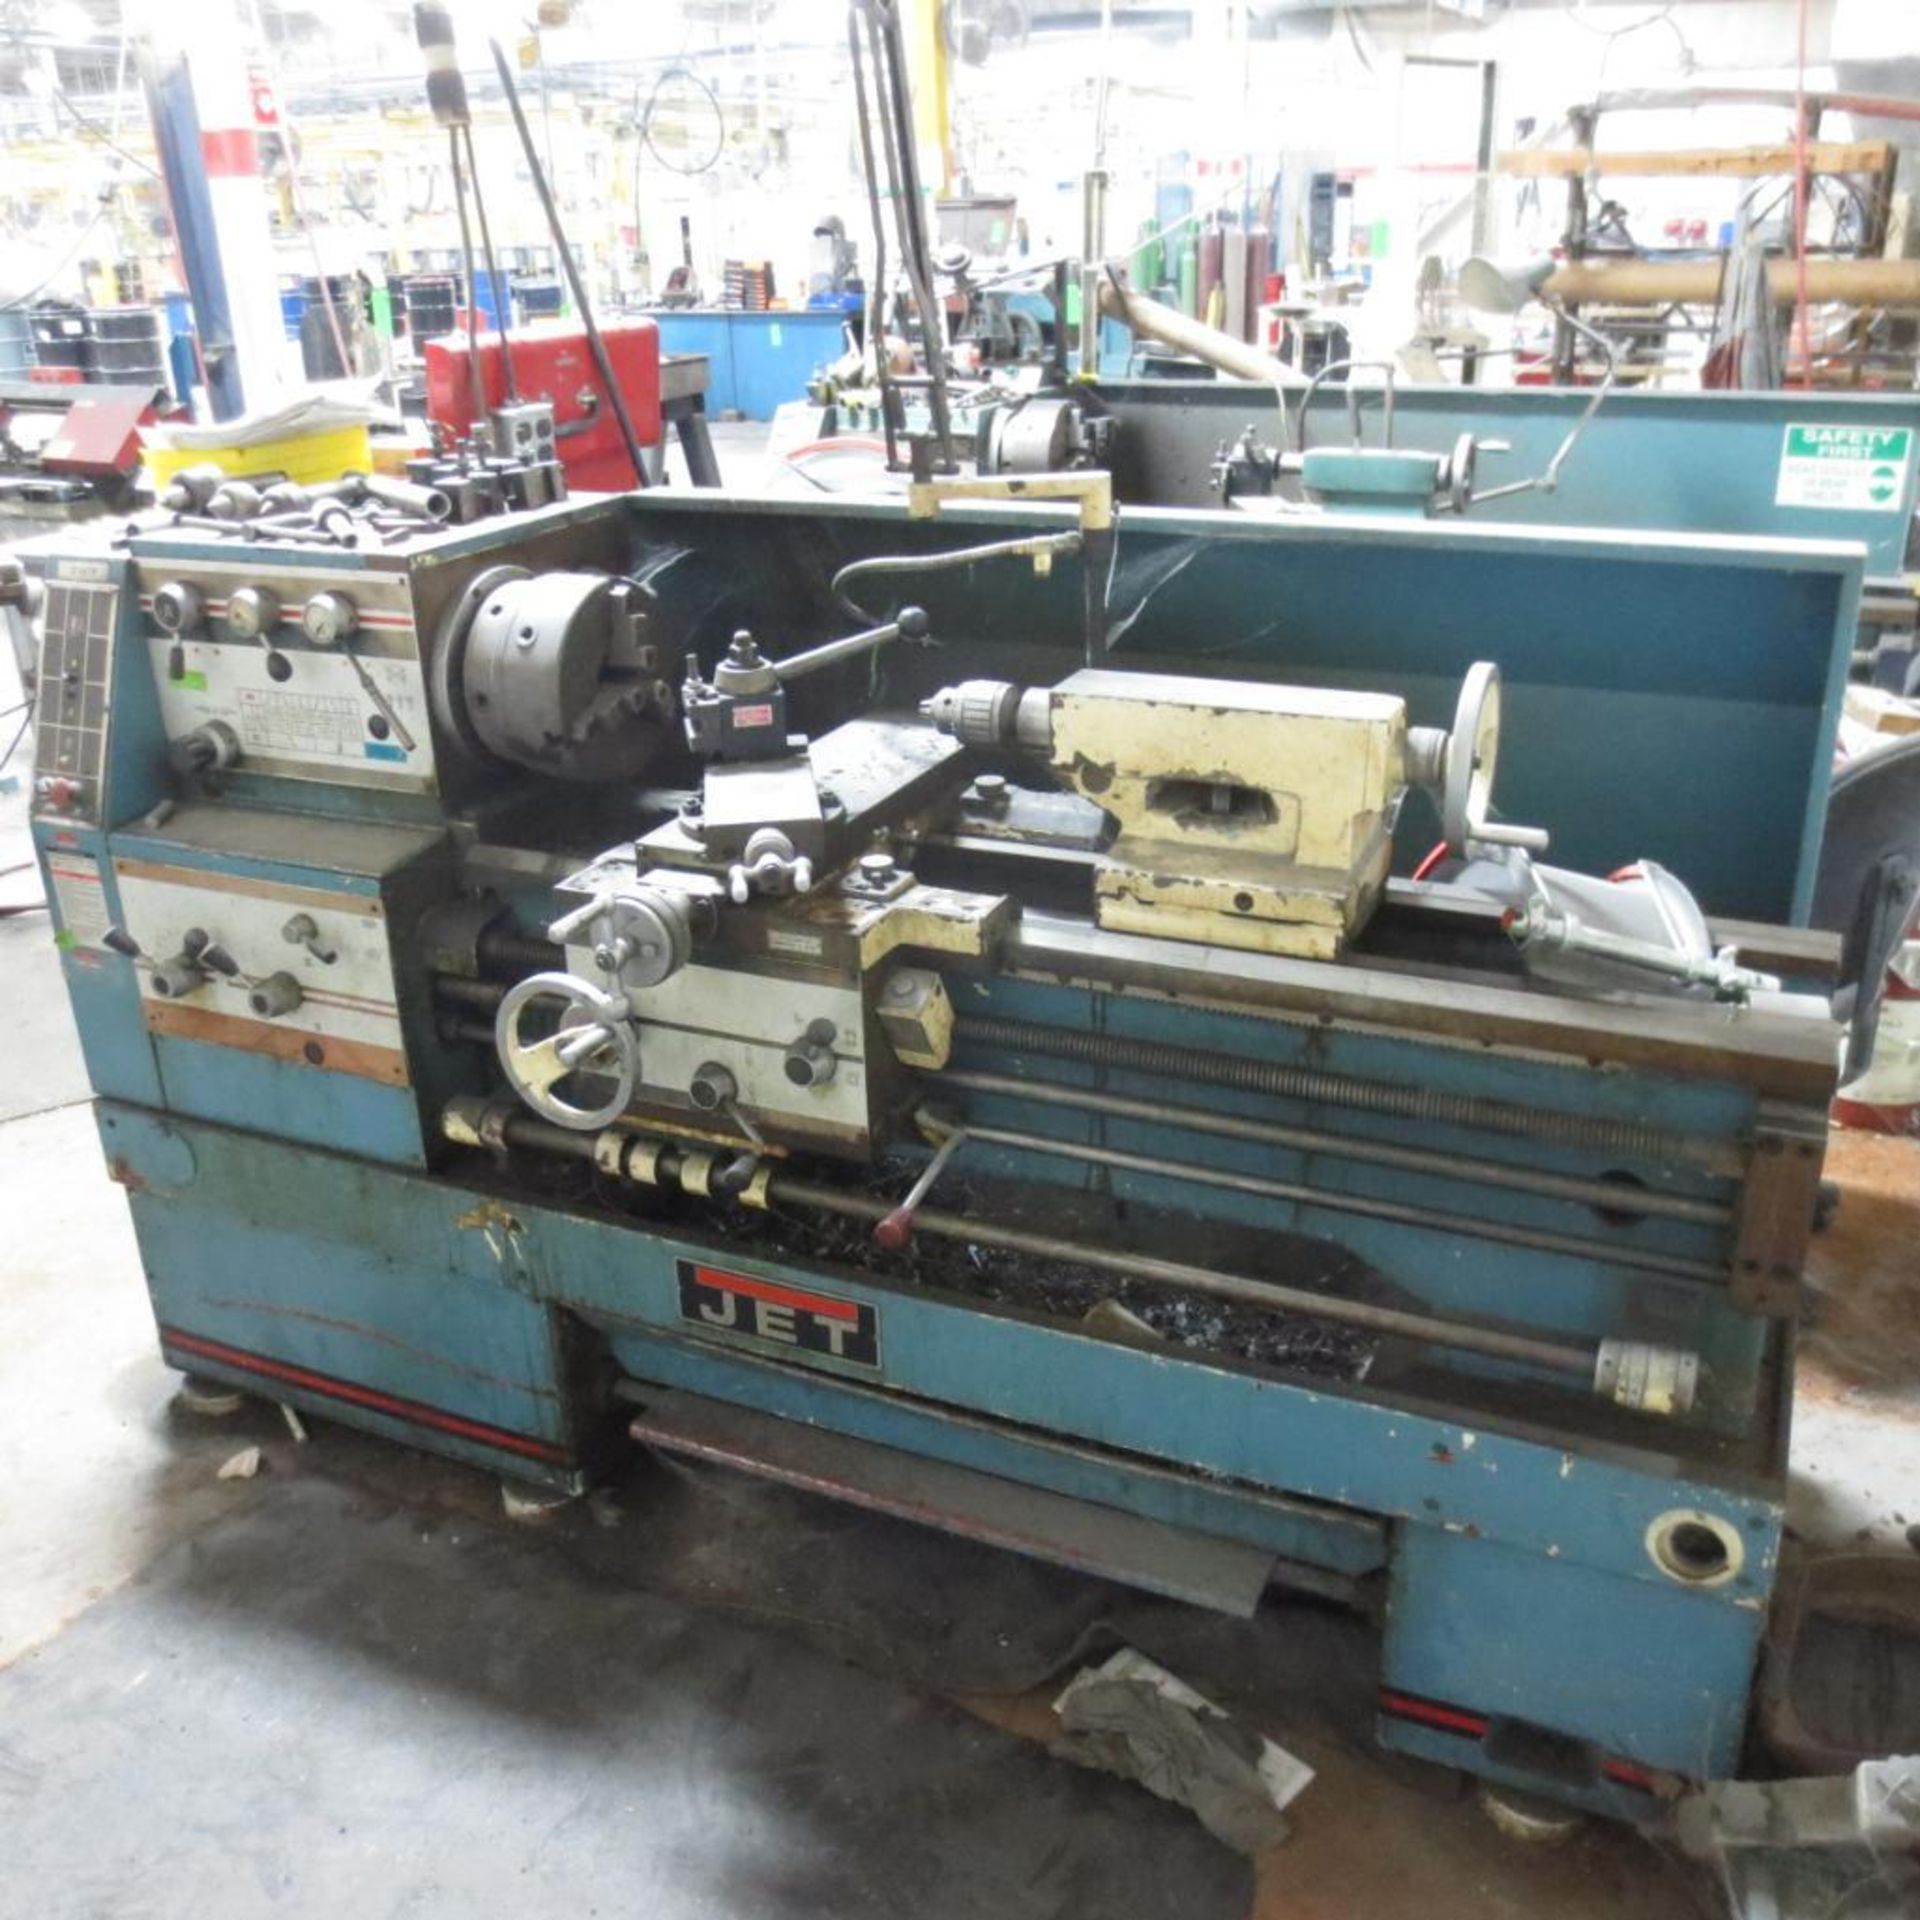 Jet Lathe, Gap Bed, 3 1/4" Hole, 16" Swing, 60" Bed, 3 Jaw Chuck, S/N 96-81-765CG With Aloris Tool P - Image 2 of 6